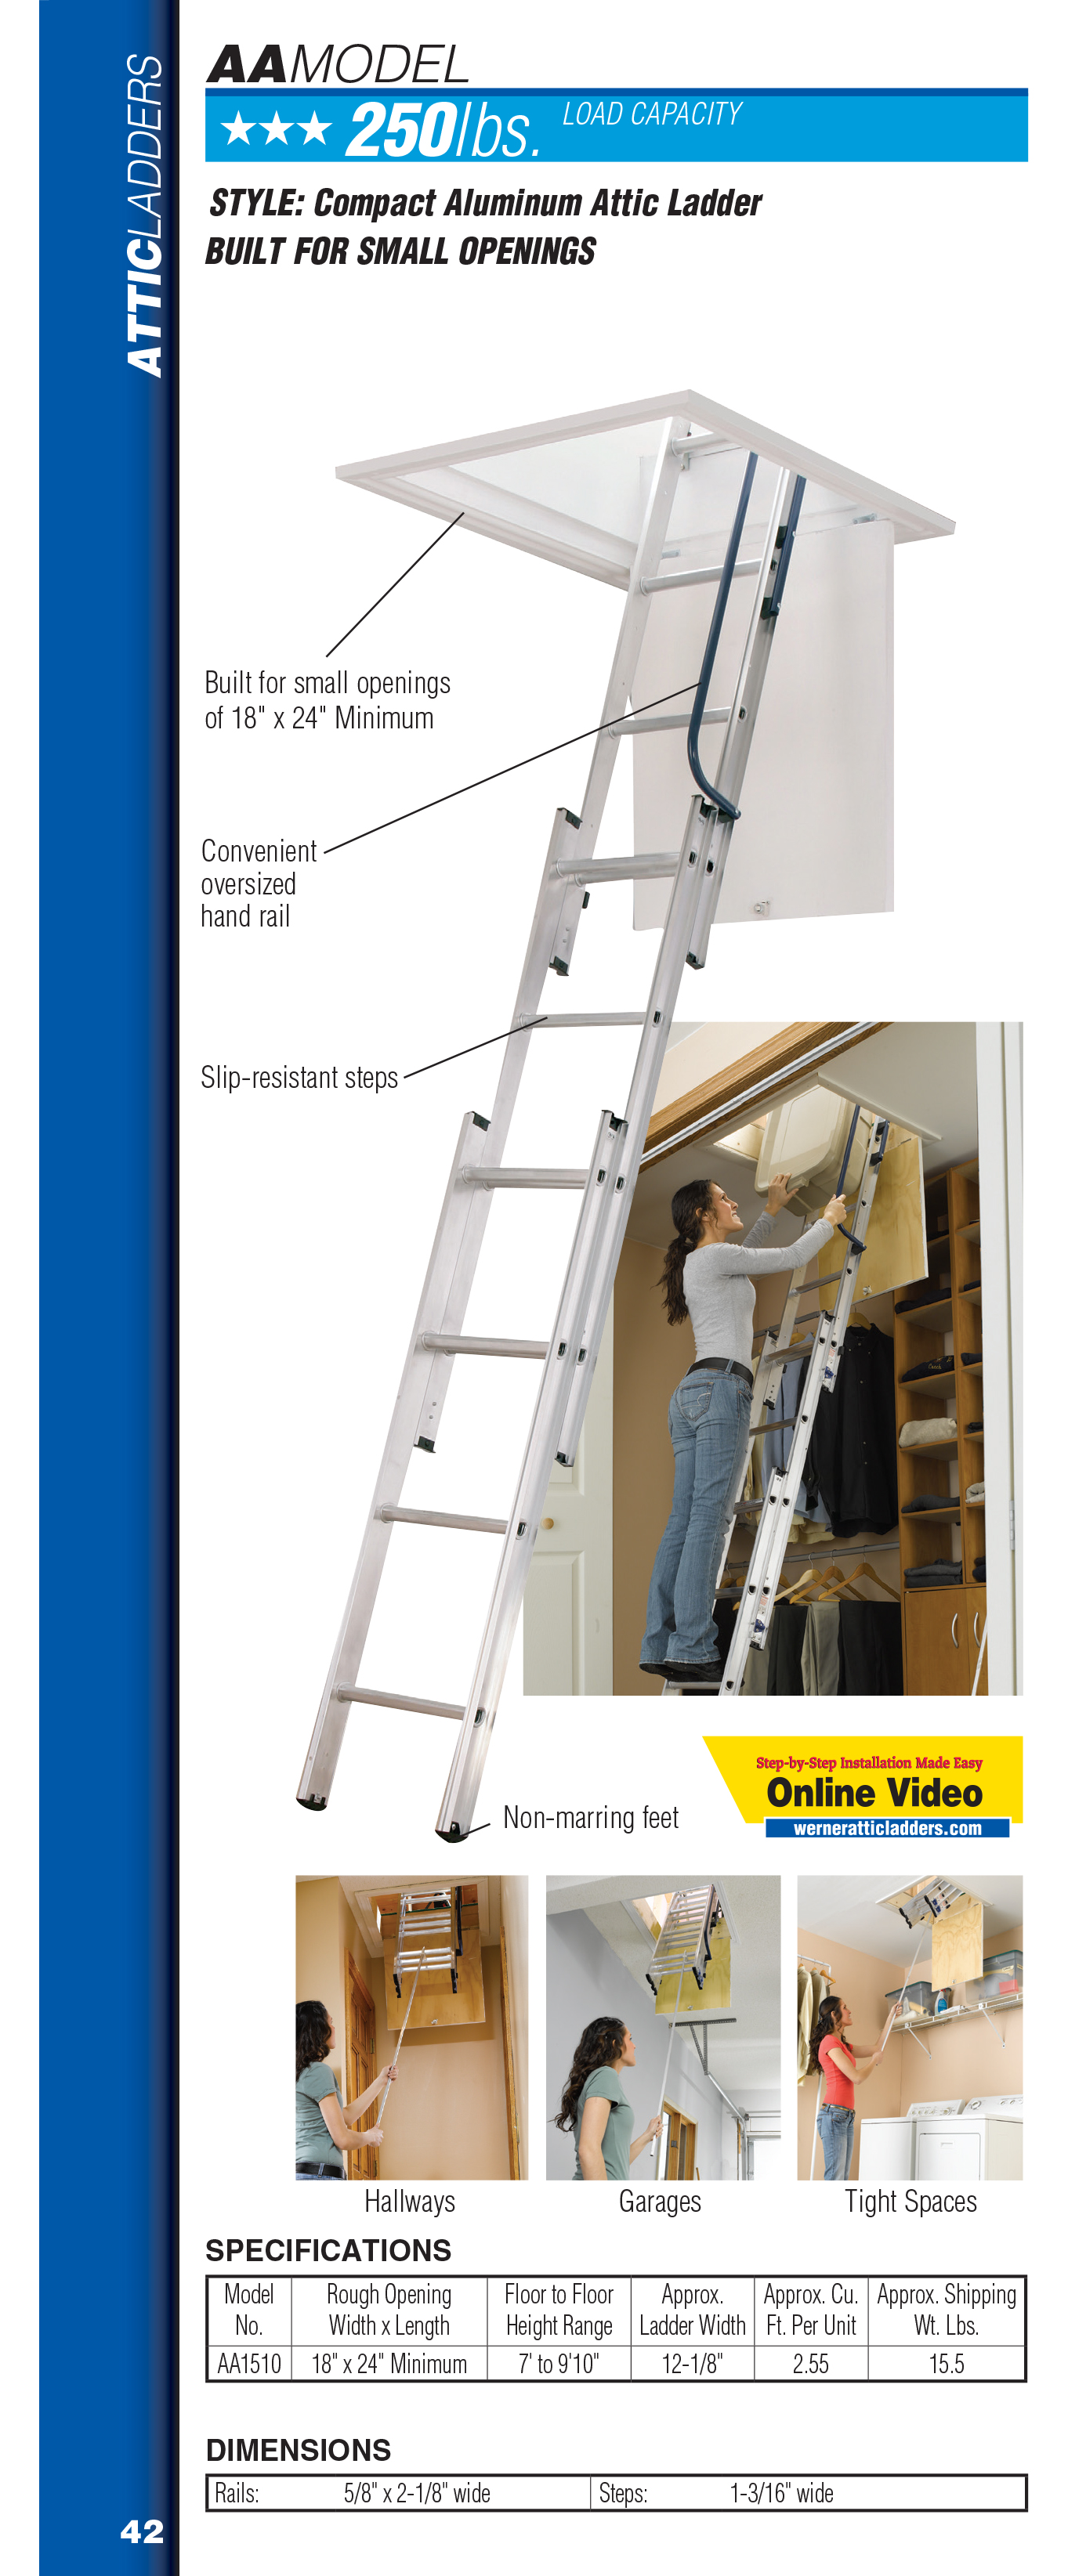 Werner AA1510B Aluminum Small Opening Attic Ladder 7' to 9'10" Ceiling Height 18" x 24